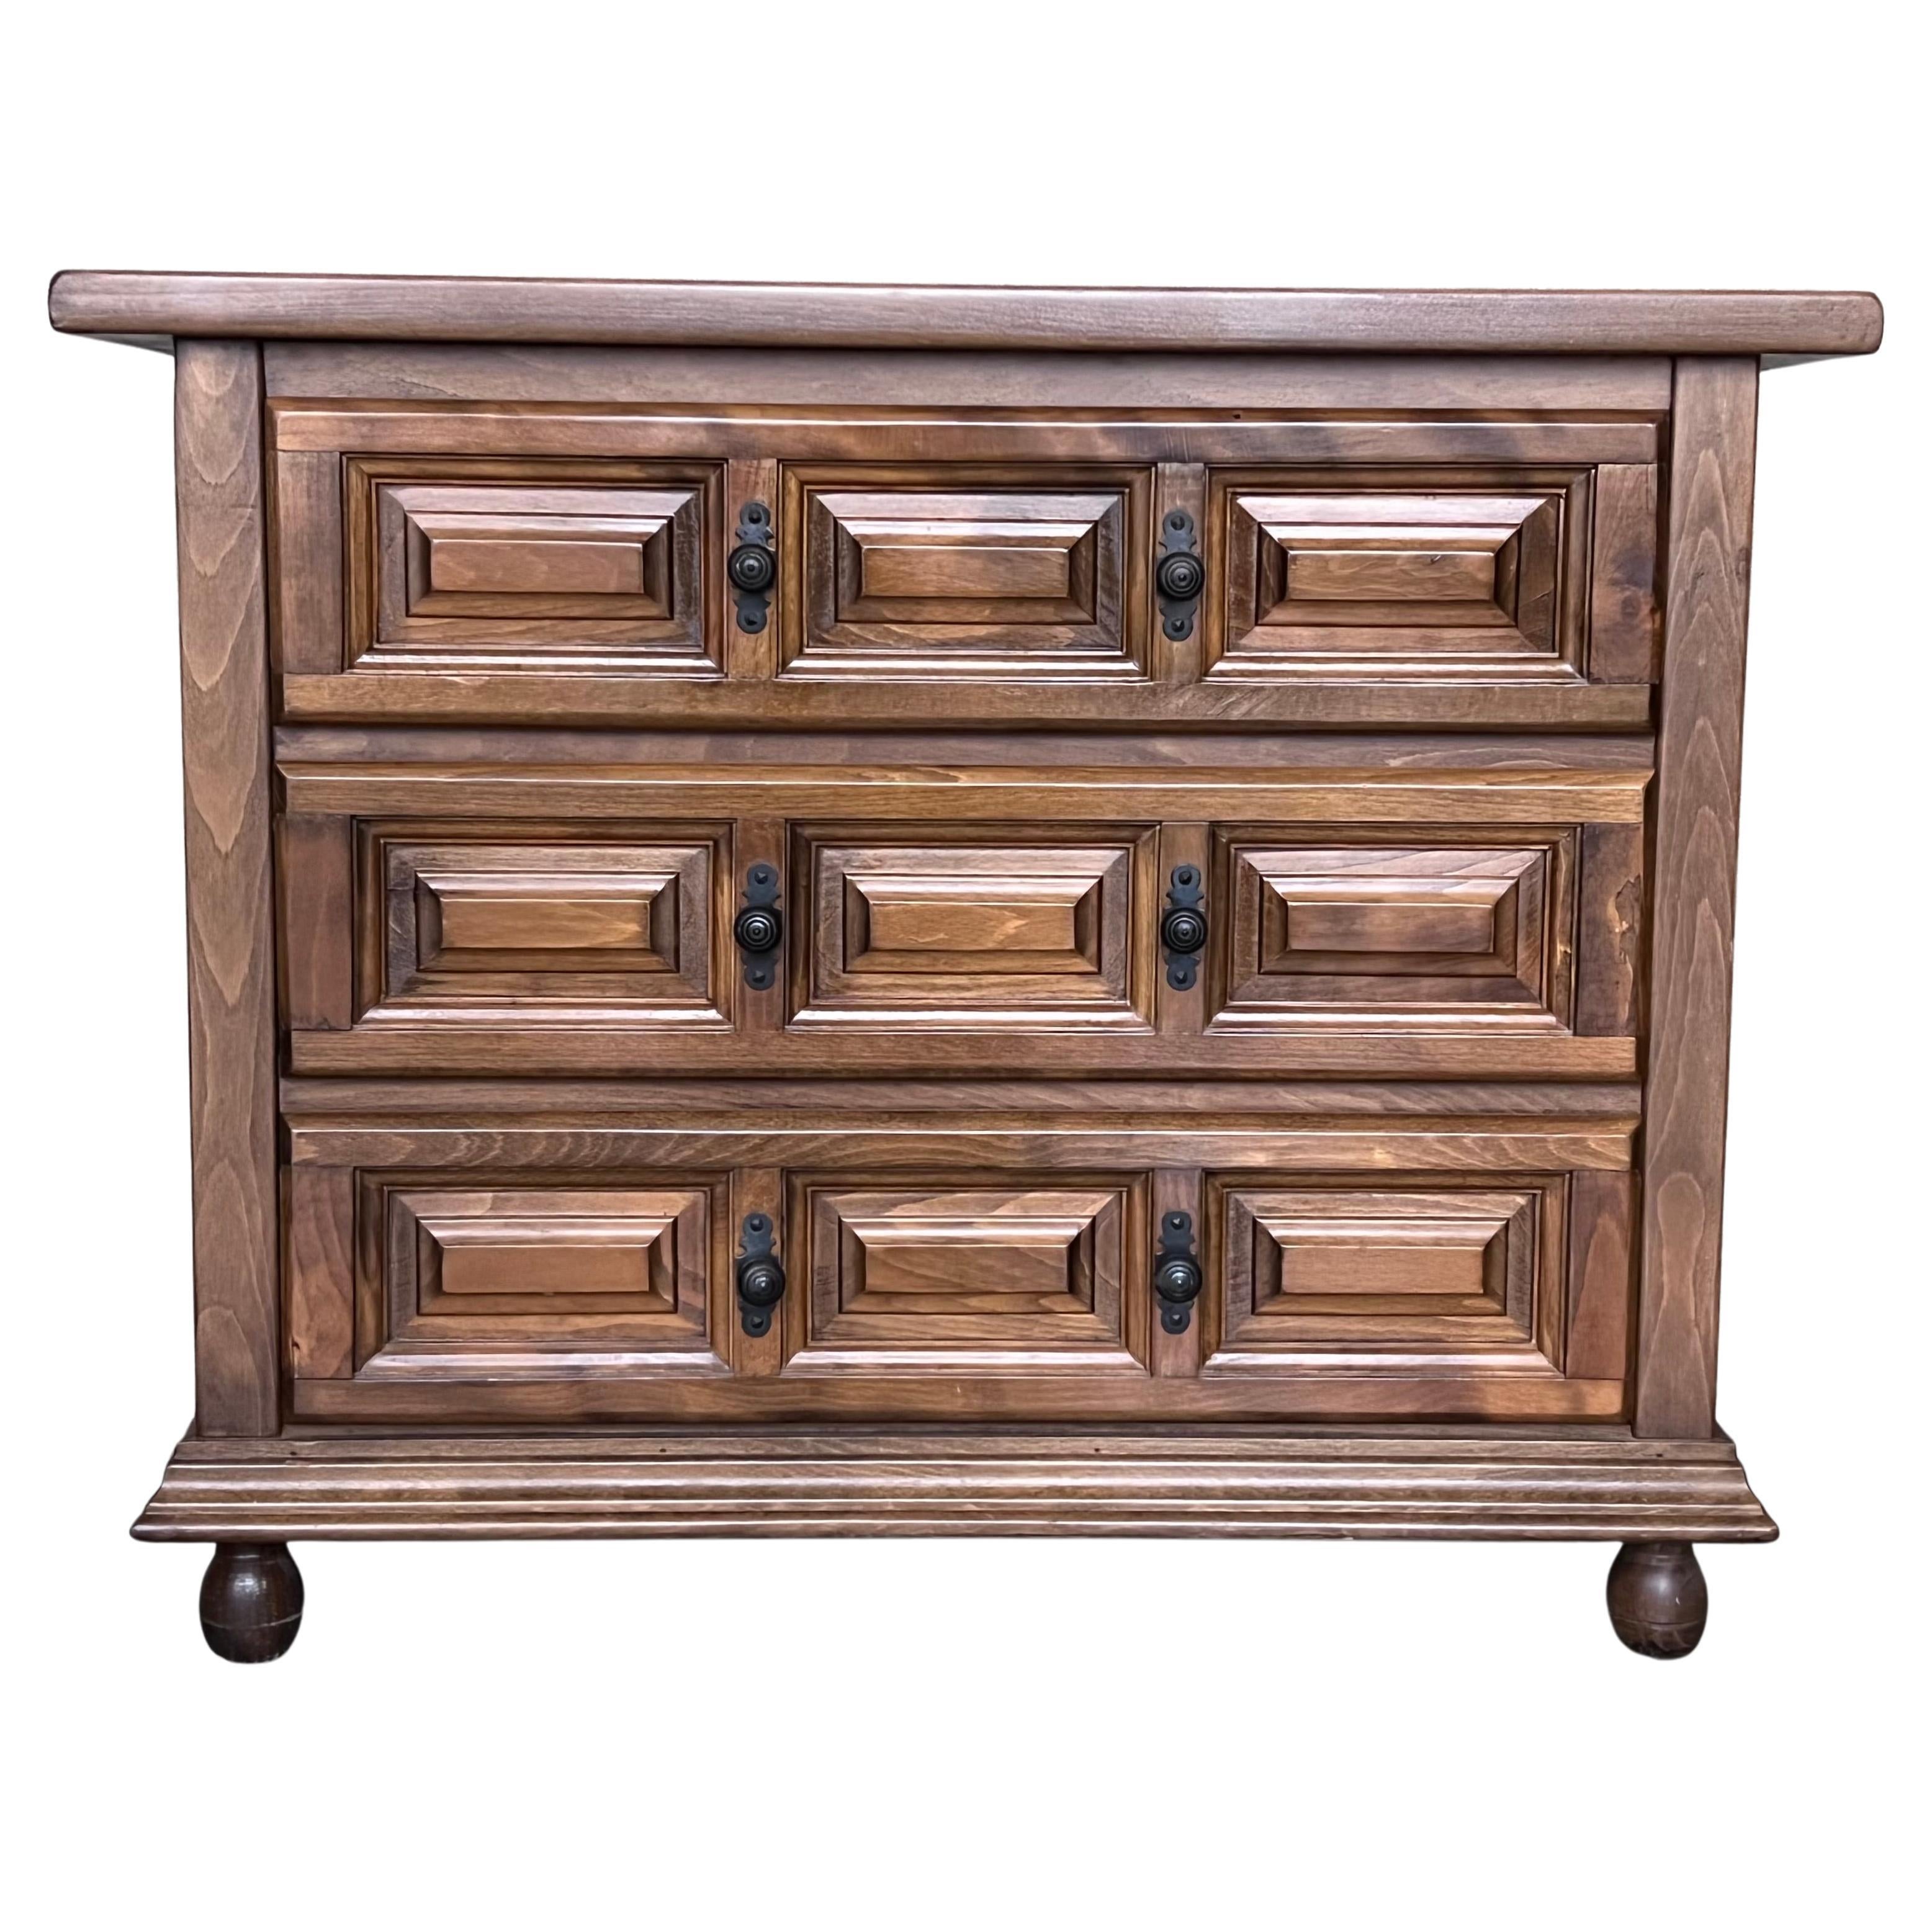 20th Catalan Spanish Baroque Carved Walnut Tuscan Three Drawers Chest of Drawers For Sale